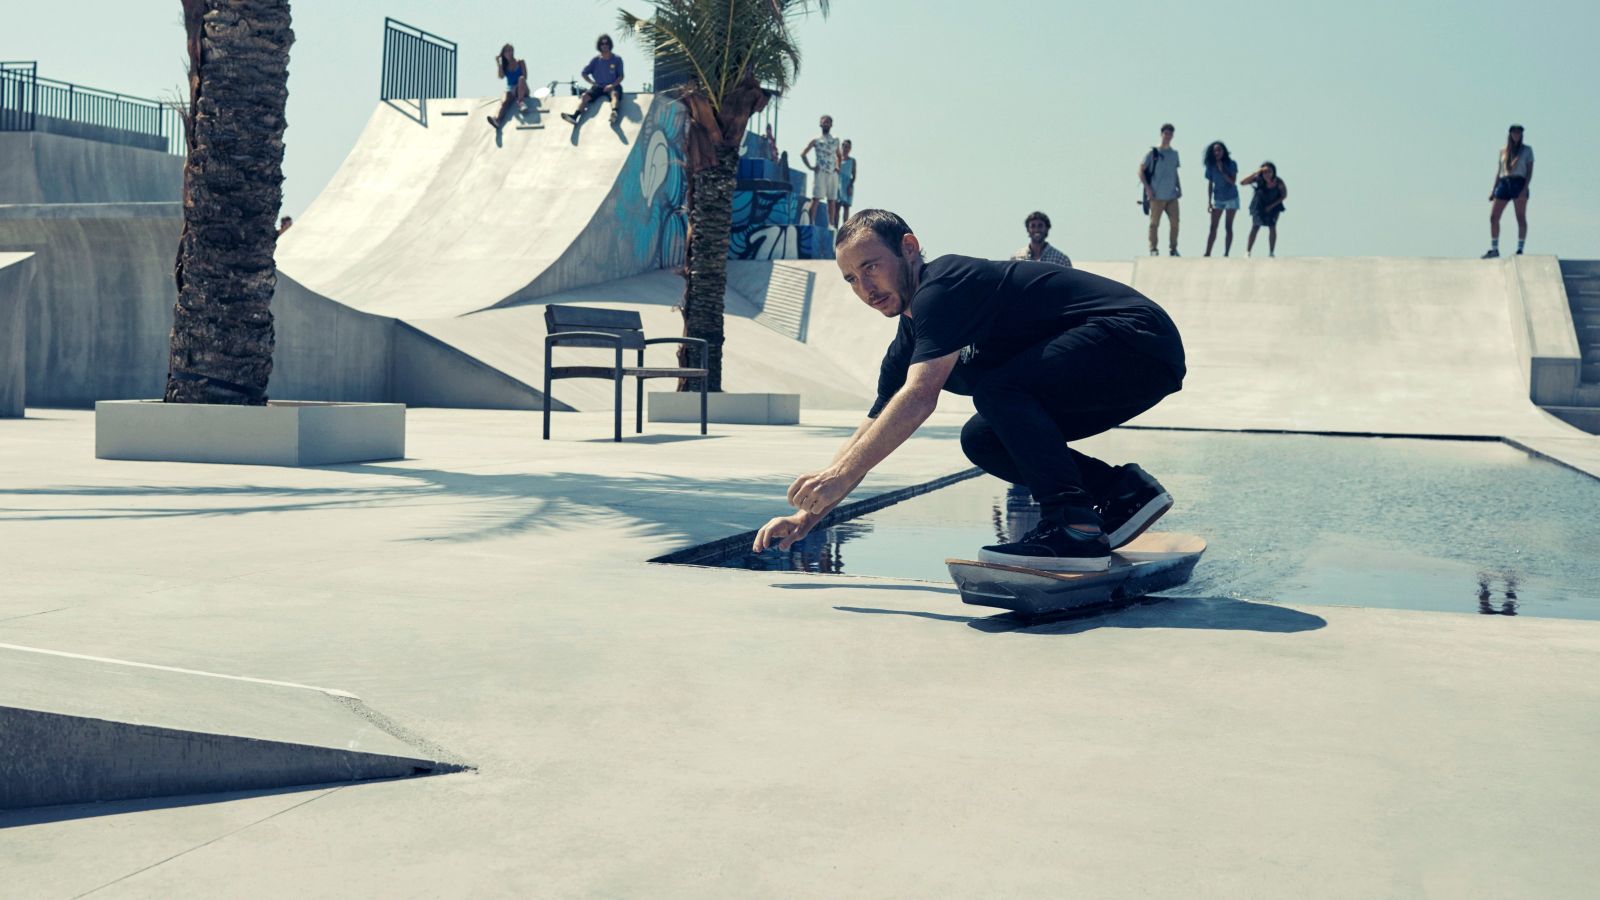 Hoverboard - Watch the Lexus flying skateboard finally in action